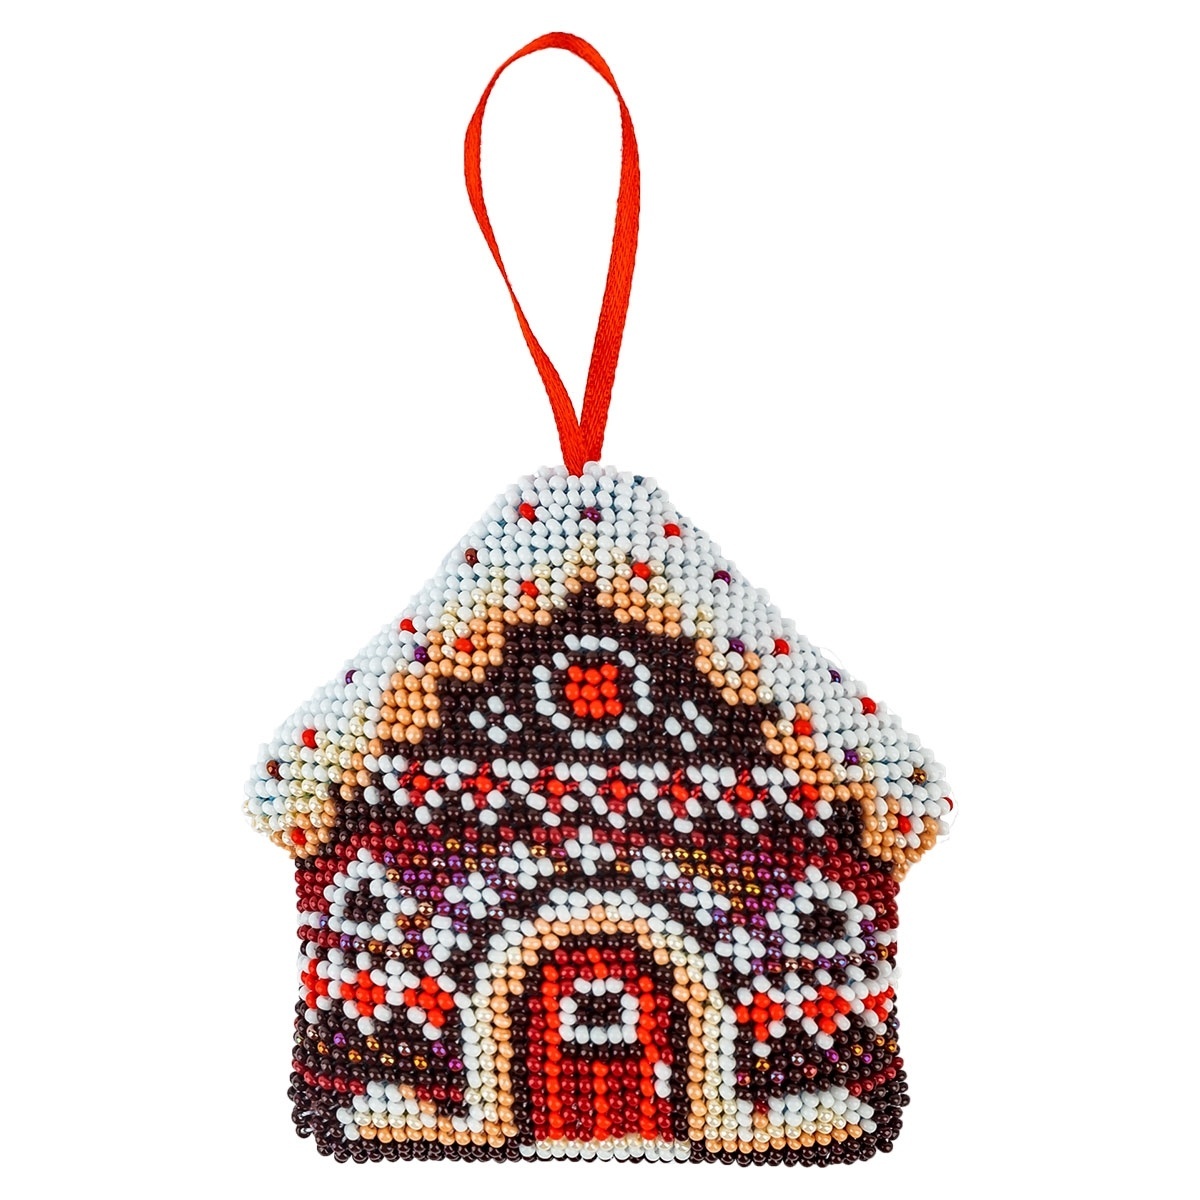 New Year's Toy Festive House Bead Embroidery Kit фото 1